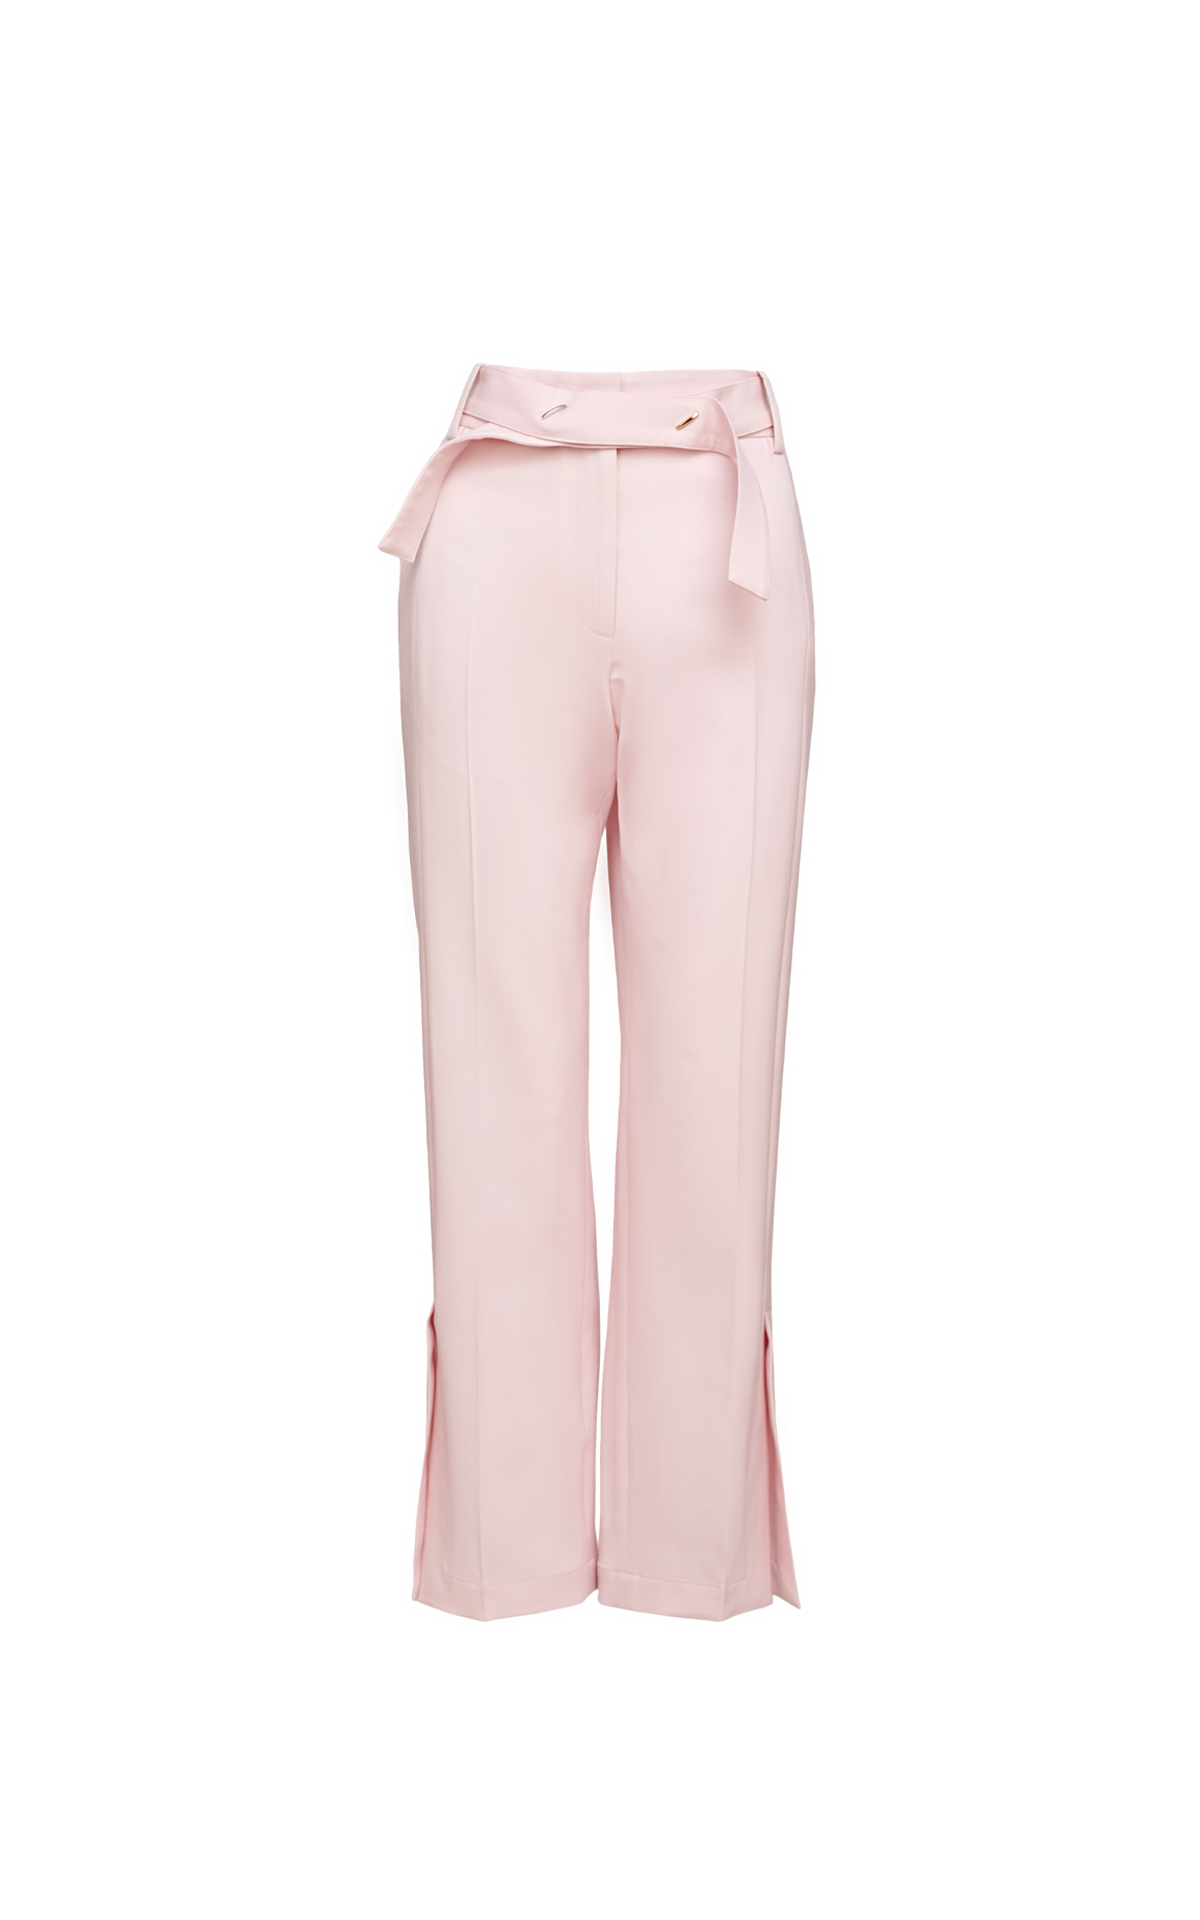 Eudon Choi Mcgrail trouser pink from Bicester Village